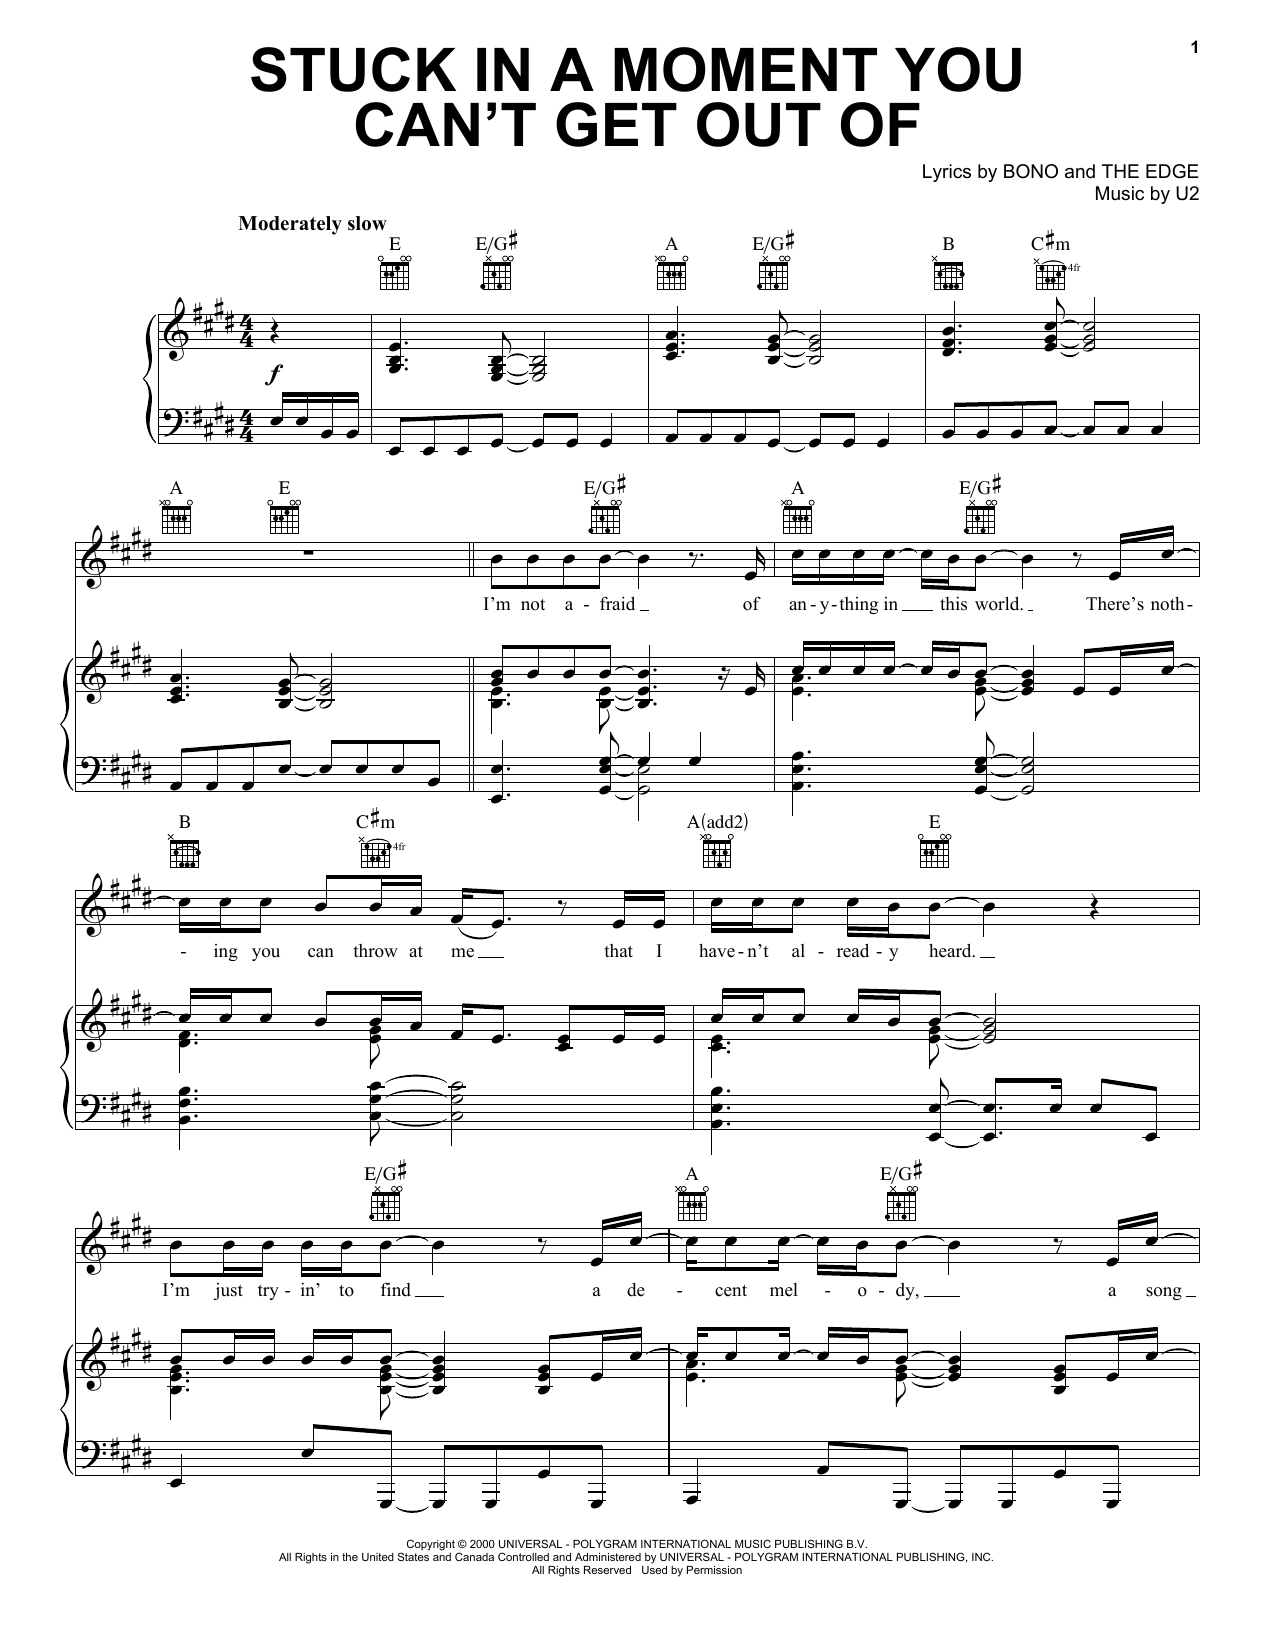 U2 Stuck In A Moment You Can't Get Out Of sheet music notes and chords. Download Printable PDF.